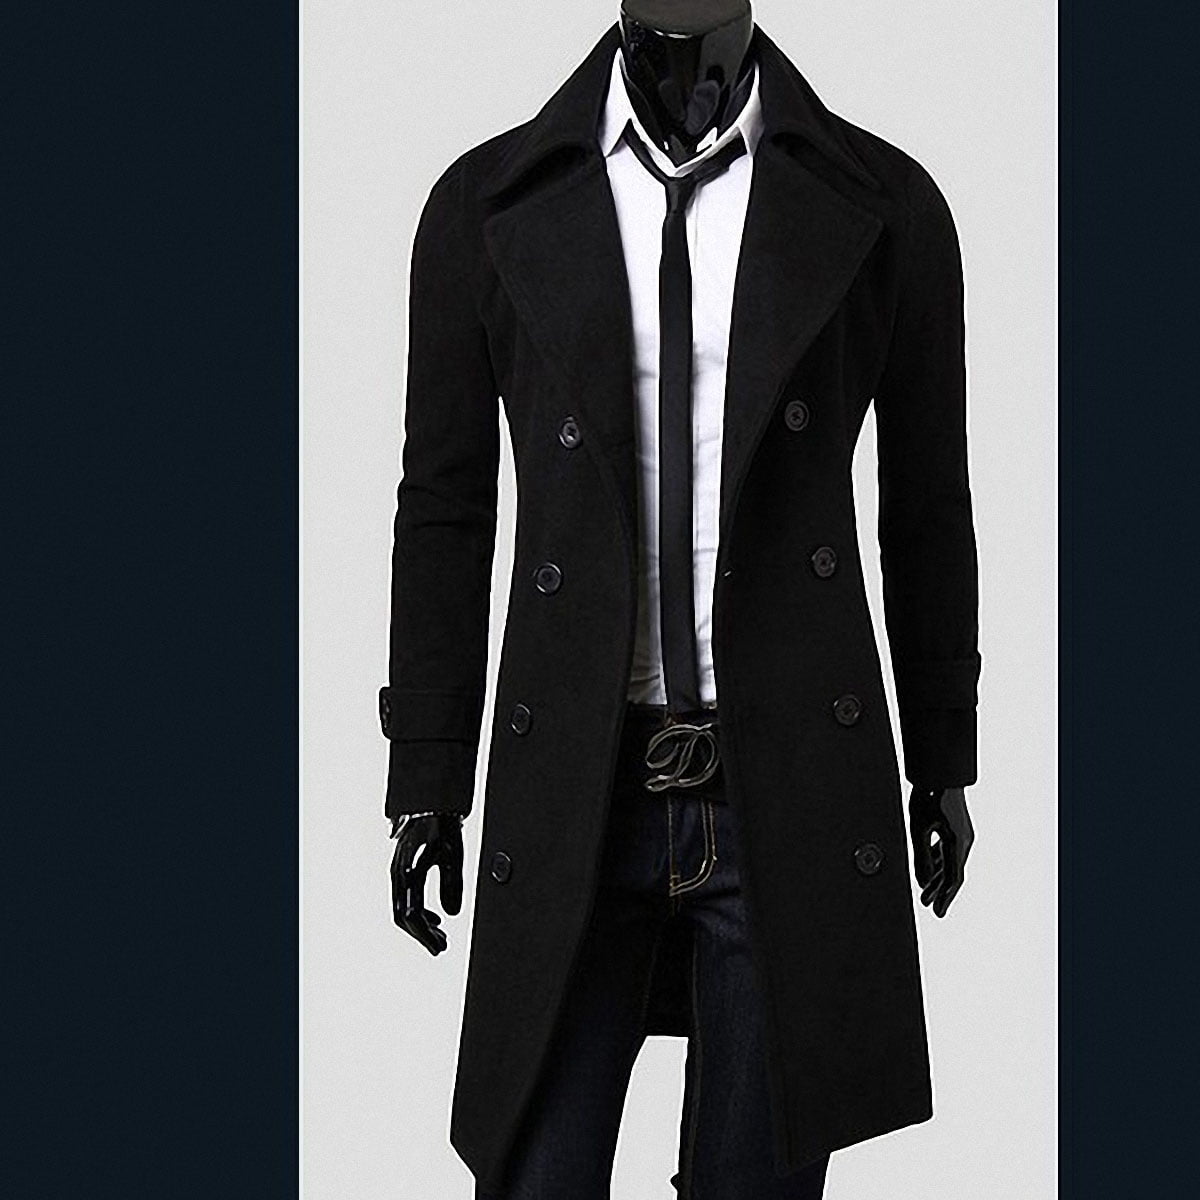 Black Fashion Men's Woolen Double-Breasted Coat Overcoat Size-M For 170 ...